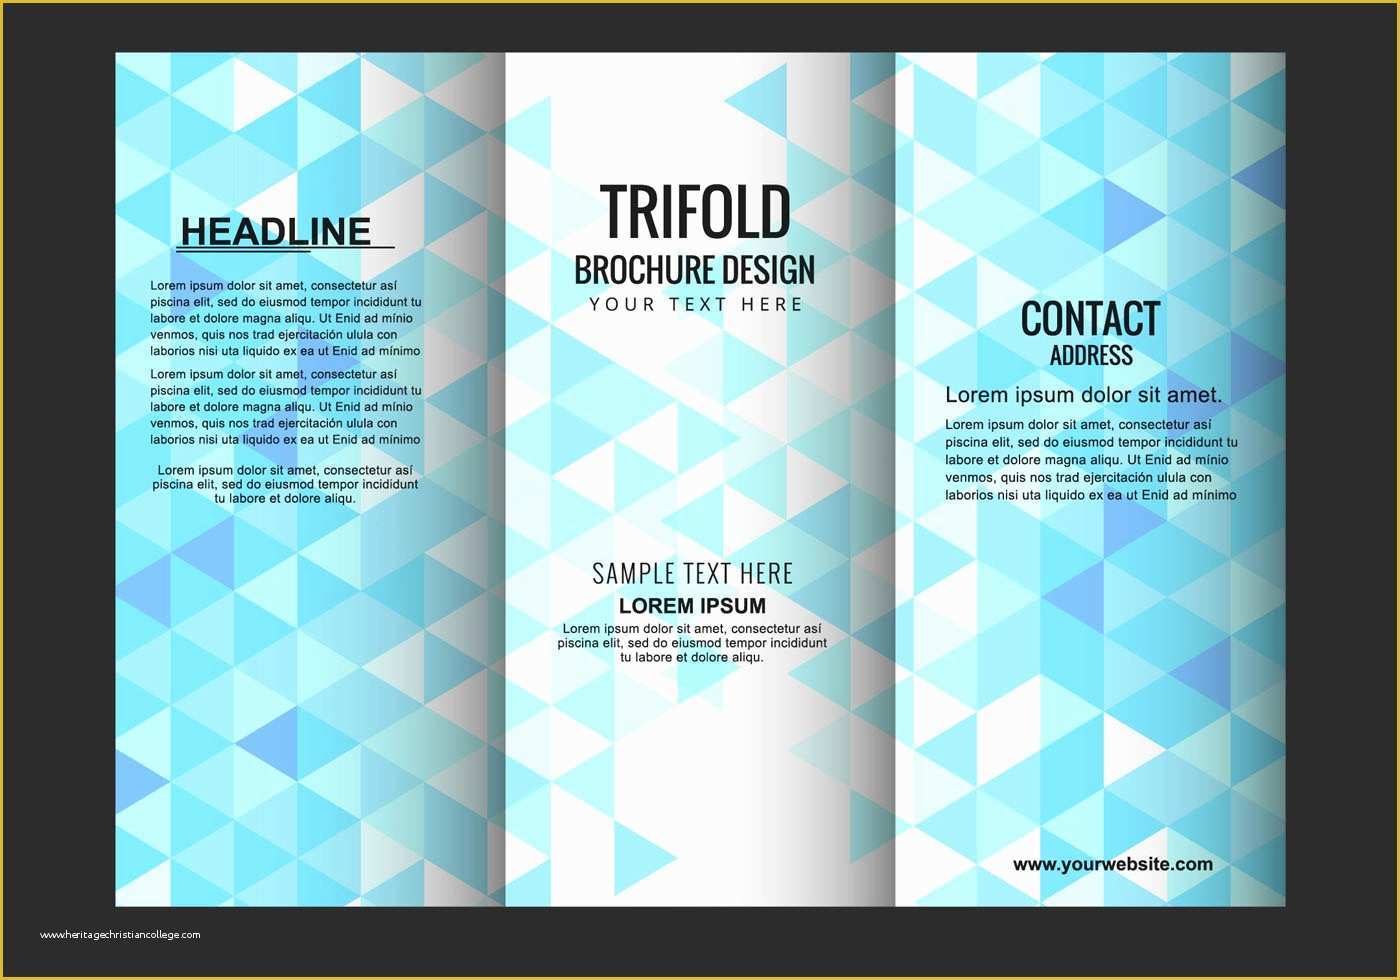 Free Brochure Templates Of Vector Trifold Brochure Template Download Free Vector